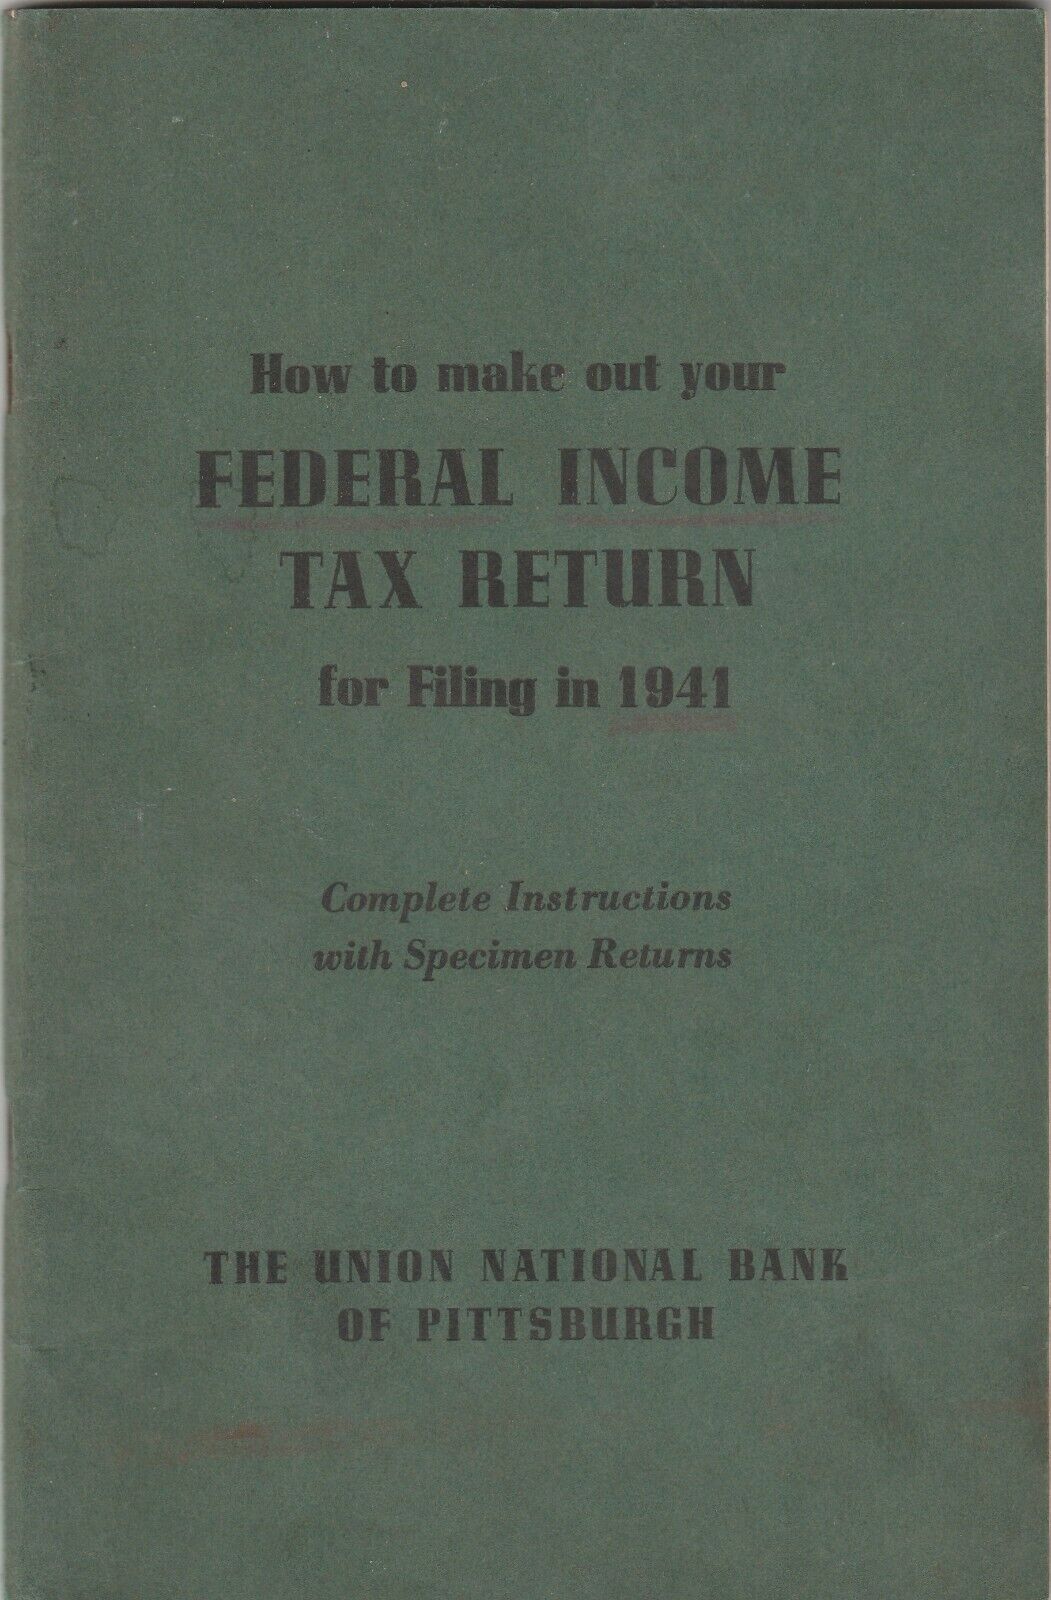 1941 HOW TO MAKEOUT YOUR FEDERAL INCOME TAX RETURN BOOK  BANK OF PITTSBURGH